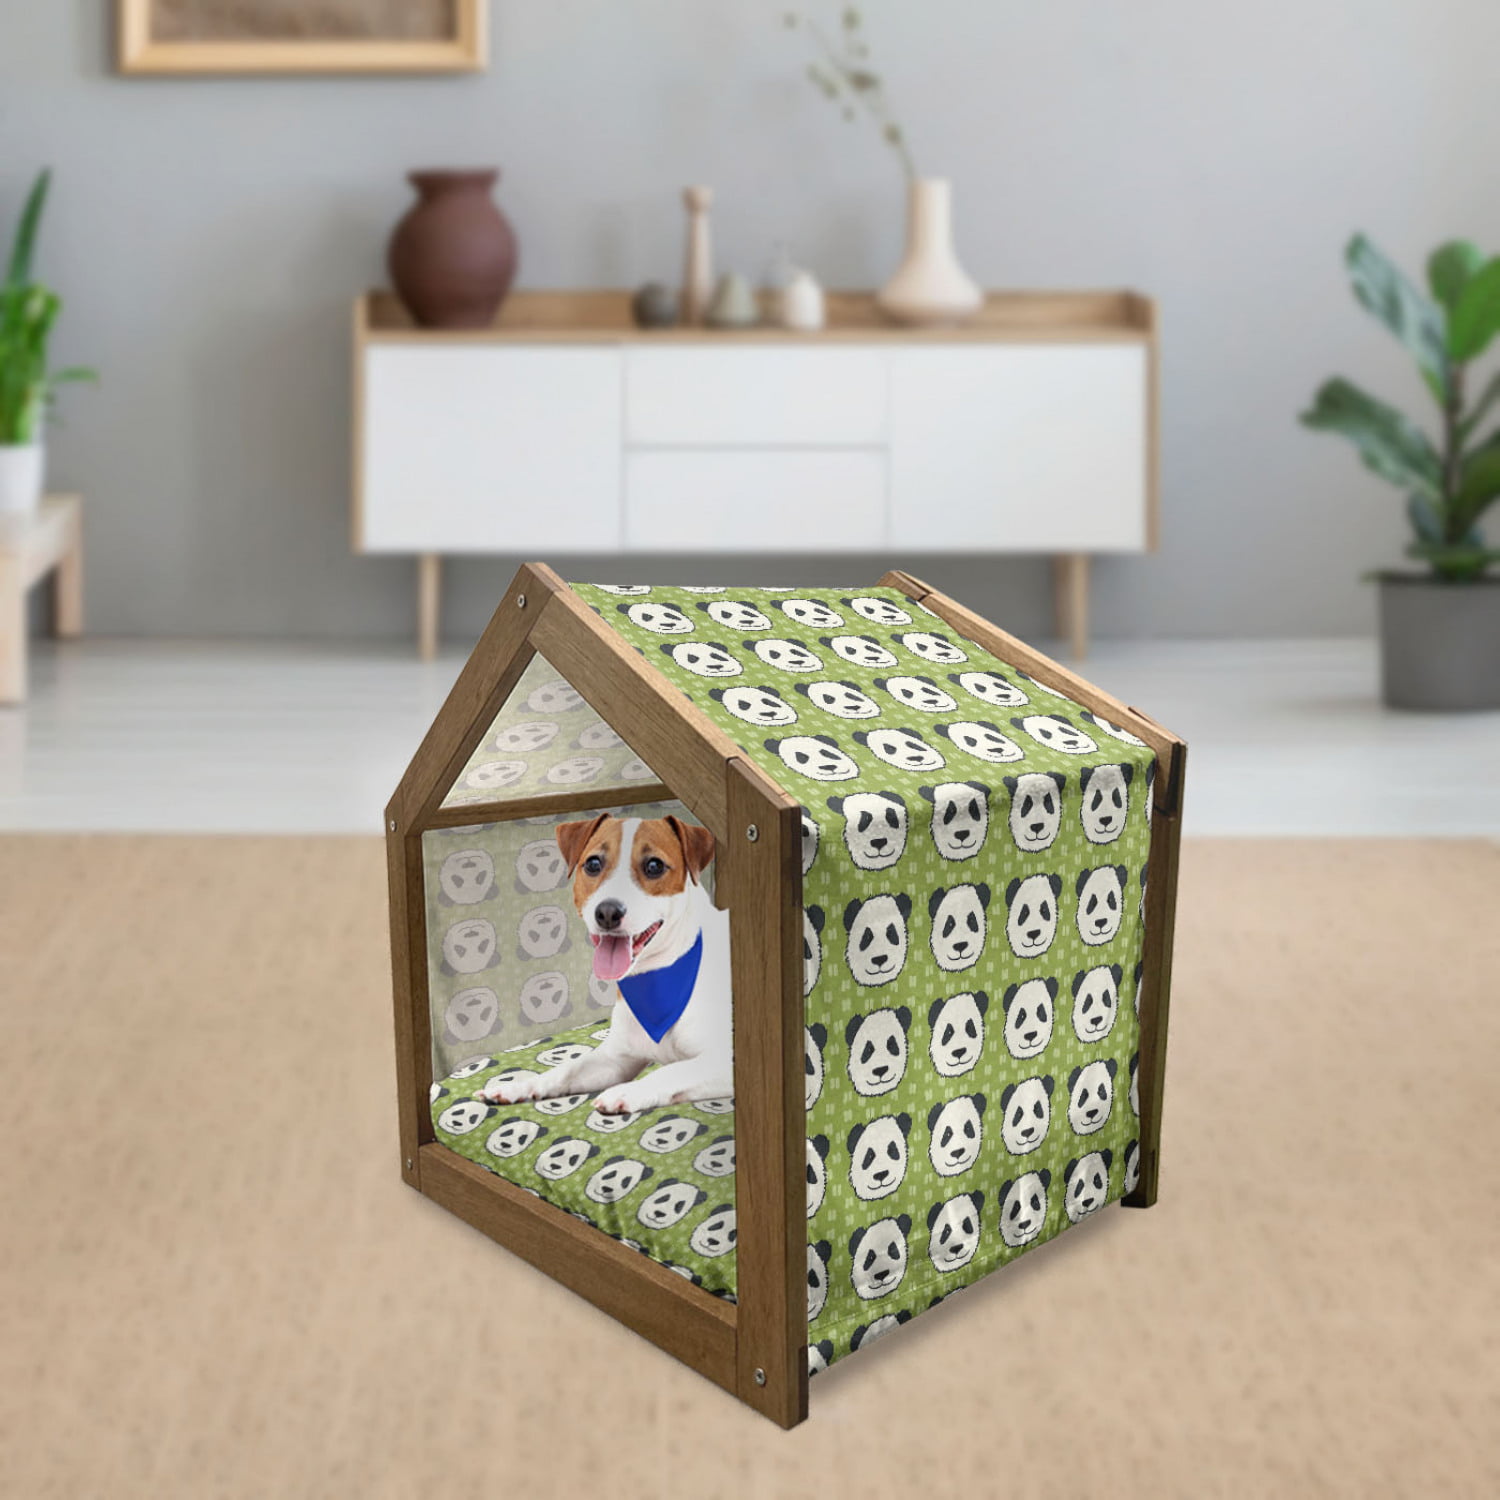 Music Pet House, Toys Playing in A Band Teddy Bear Drums Kitty Obua Fox Panda Cartoon, Outdoor & Indoor Portable Dog Kennel with Pillow and Cover, 5